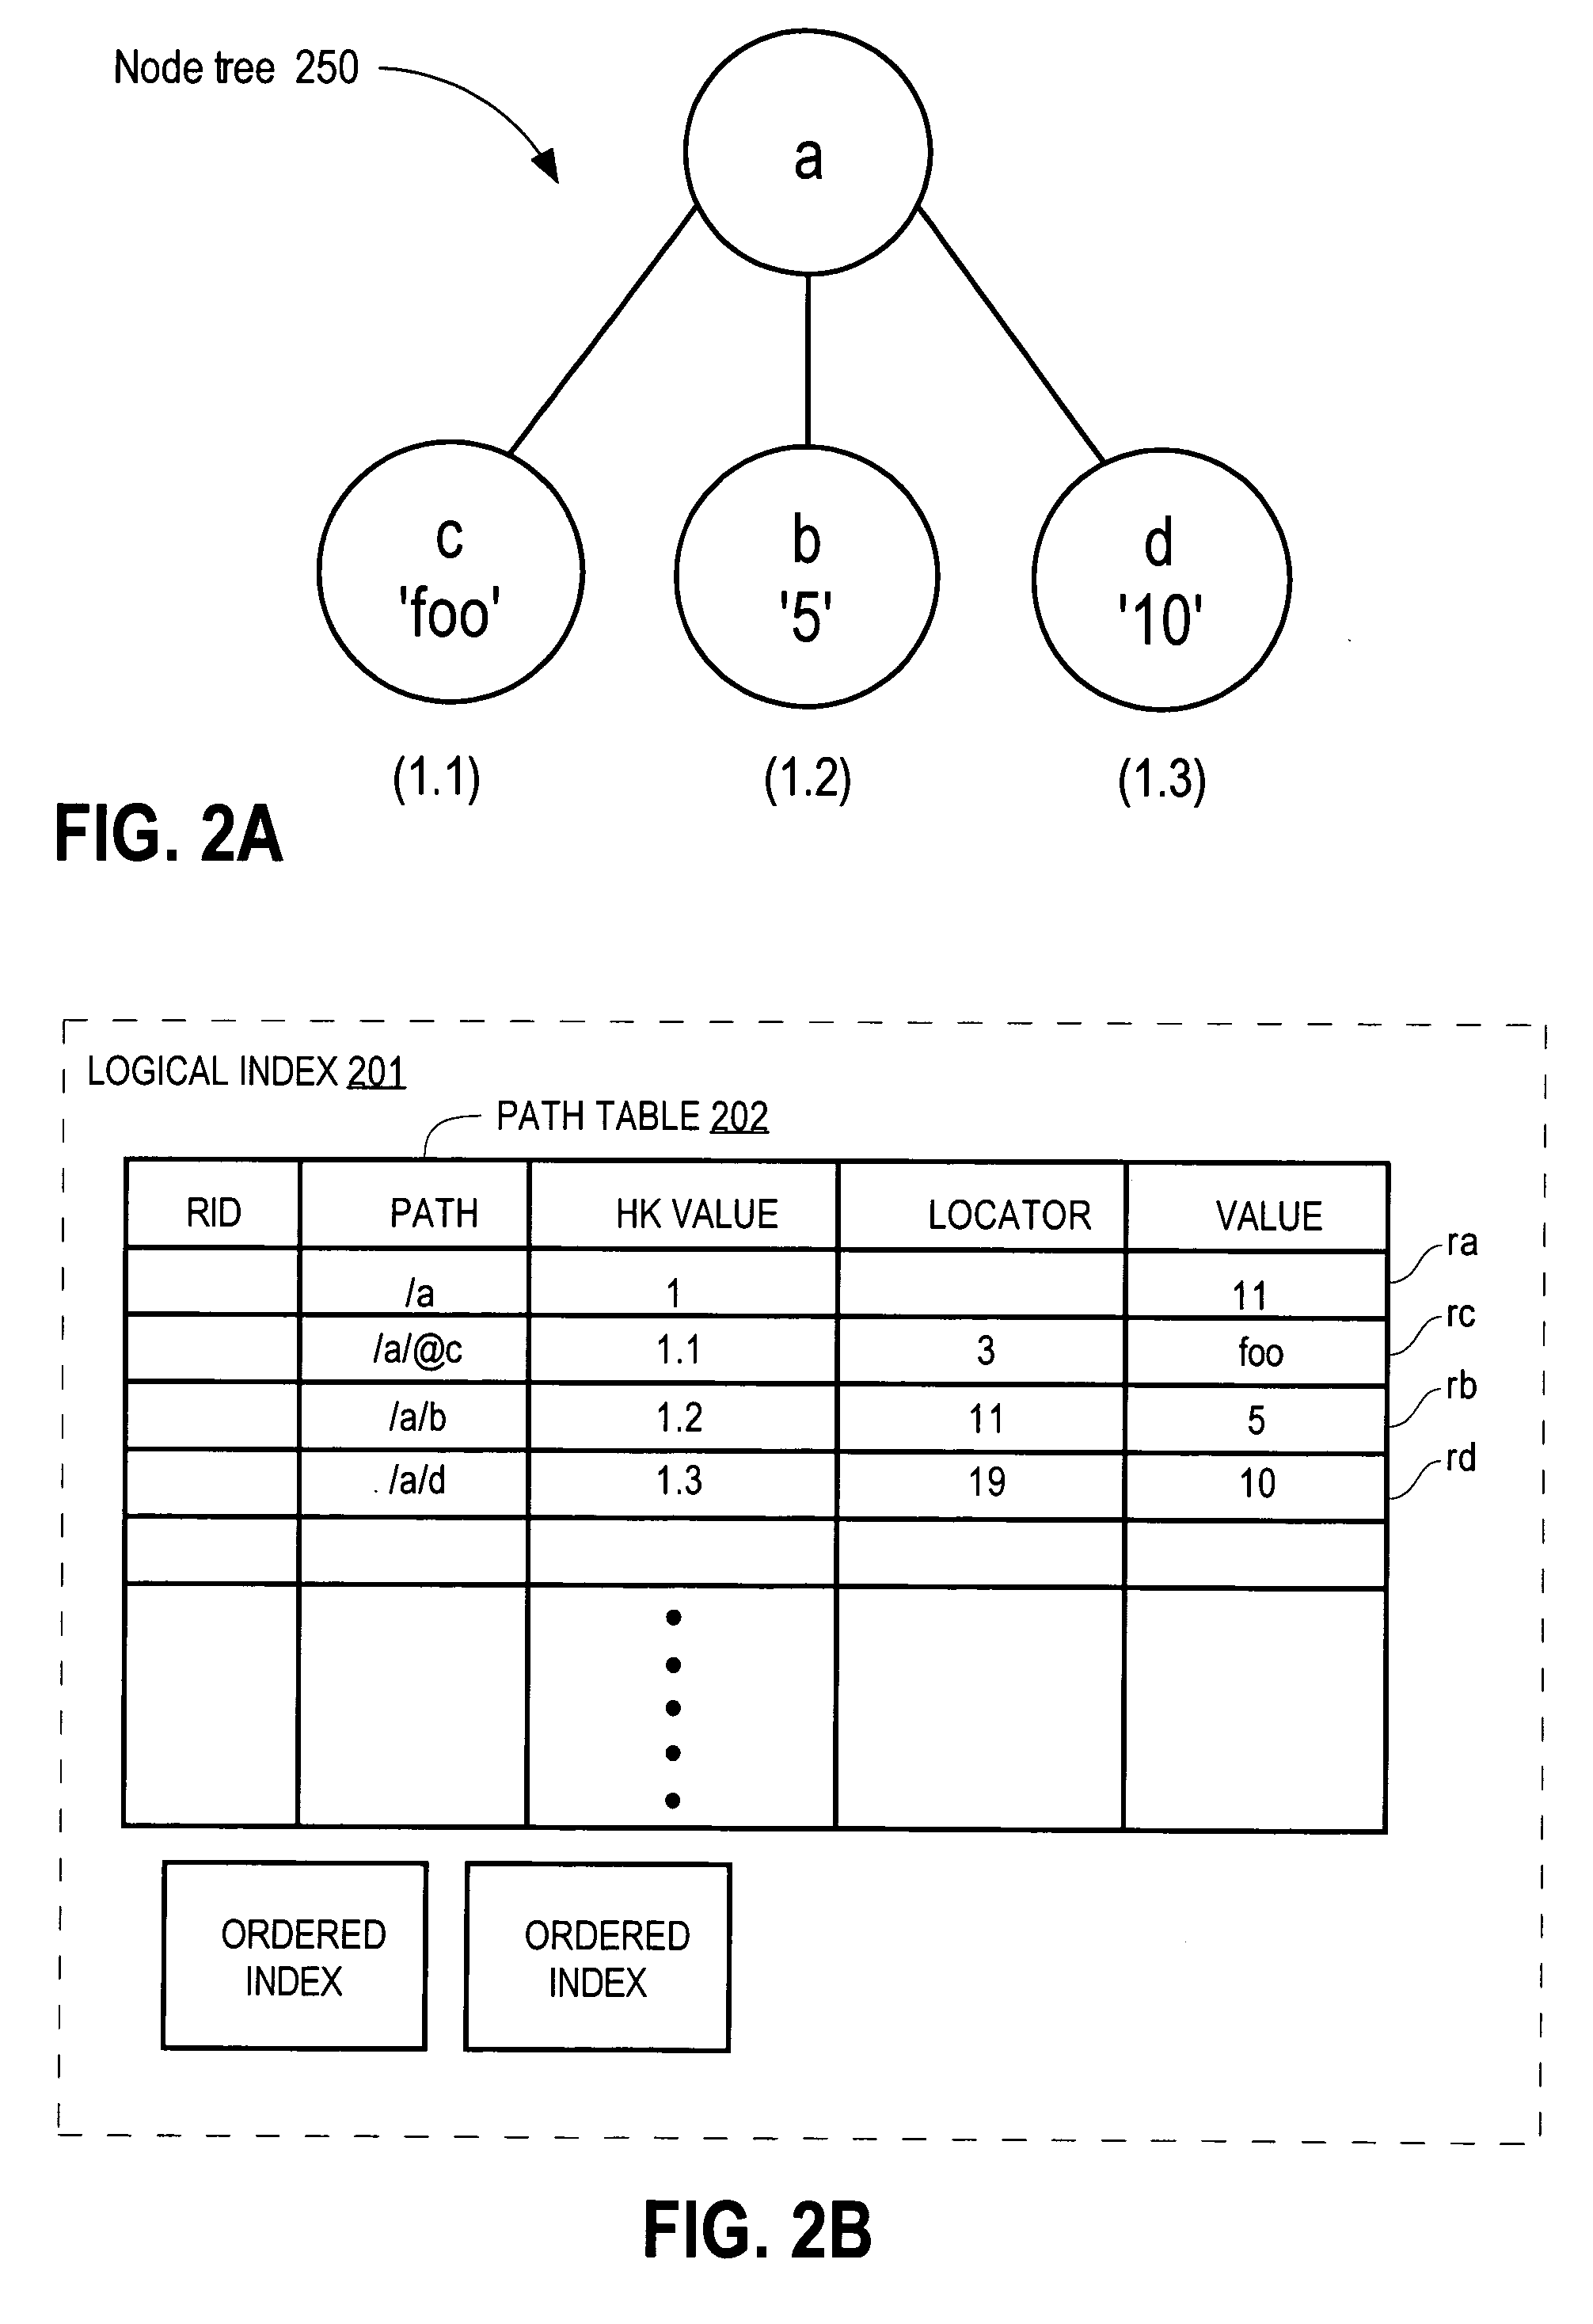 Document level indexes for efficient processing in multiple tiers of a computer system